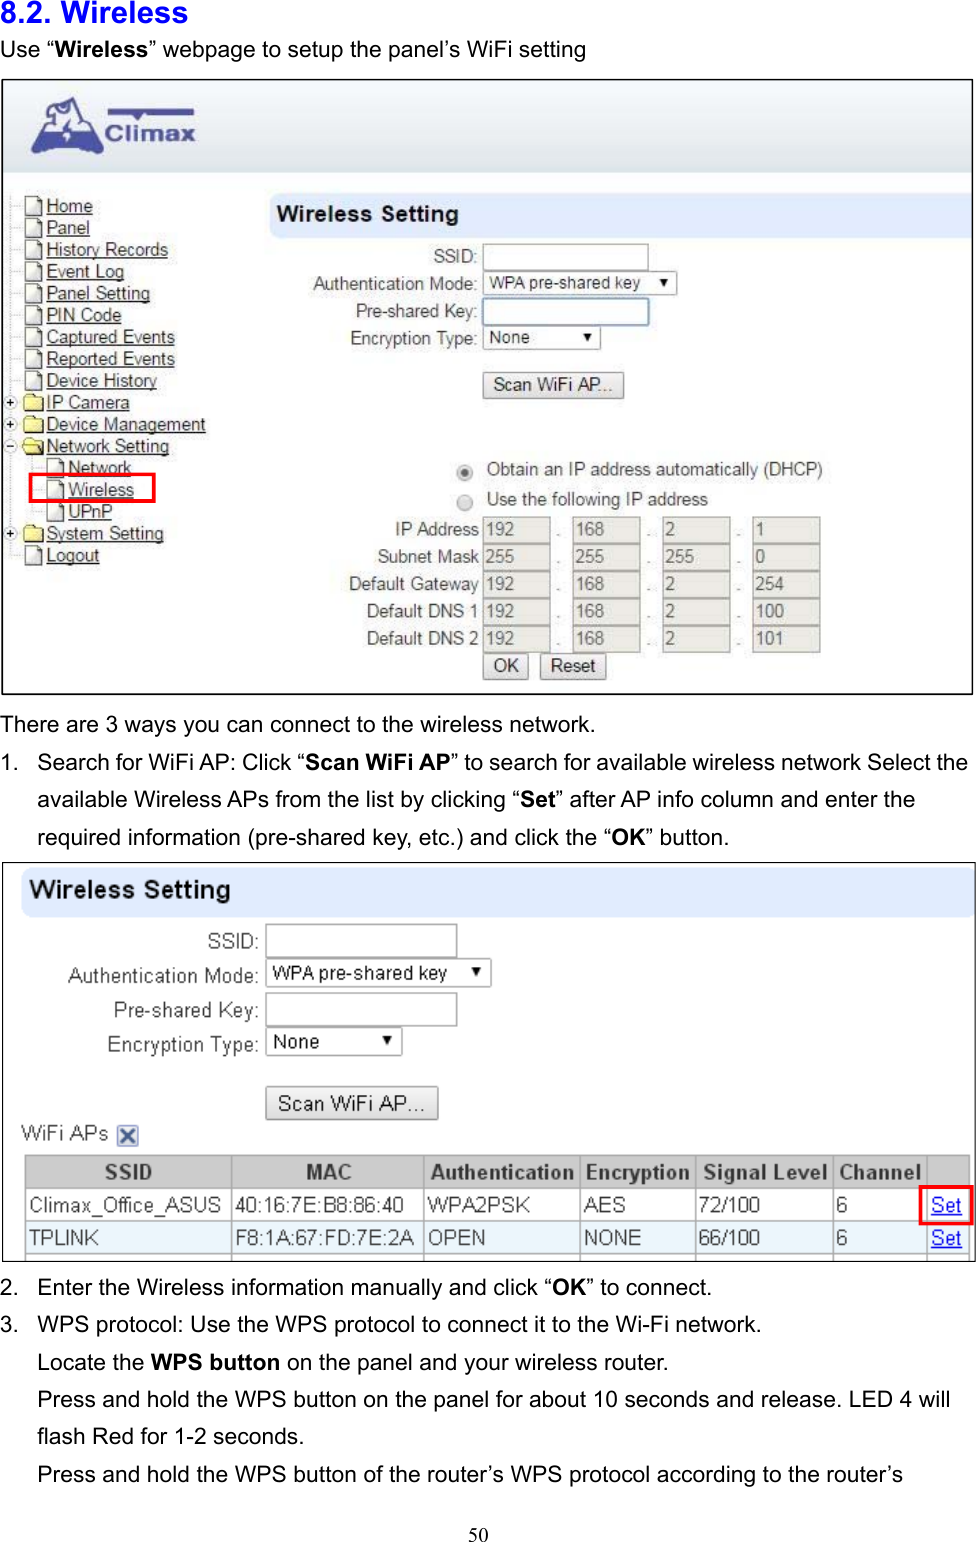  508.2. Wireless   Use “Wireless” webpage to setup the panel’s WiFi setting  There are 3 ways you can connect to the wireless network.   1.  Search for WiFi AP: Click “Scan WiFi AP” to search for available wireless network Select the available Wireless APs from the list by clicking “Set” after AP info column and enter the required information (pre-shared key, etc.) and click the “OK” button.  2.  Enter the Wireless information manually and click “OK” to connect. 3.  WPS protocol: Use the WPS protocol to connect it to the Wi-Fi network. Locate the WPS button on the panel and your wireless router. Press and hold the WPS button on the panel for about 10 seconds and release. LED 4 will flash Red for 1-2 seconds. Press and hold the WPS button of the router’s WPS protocol according to the router’s 